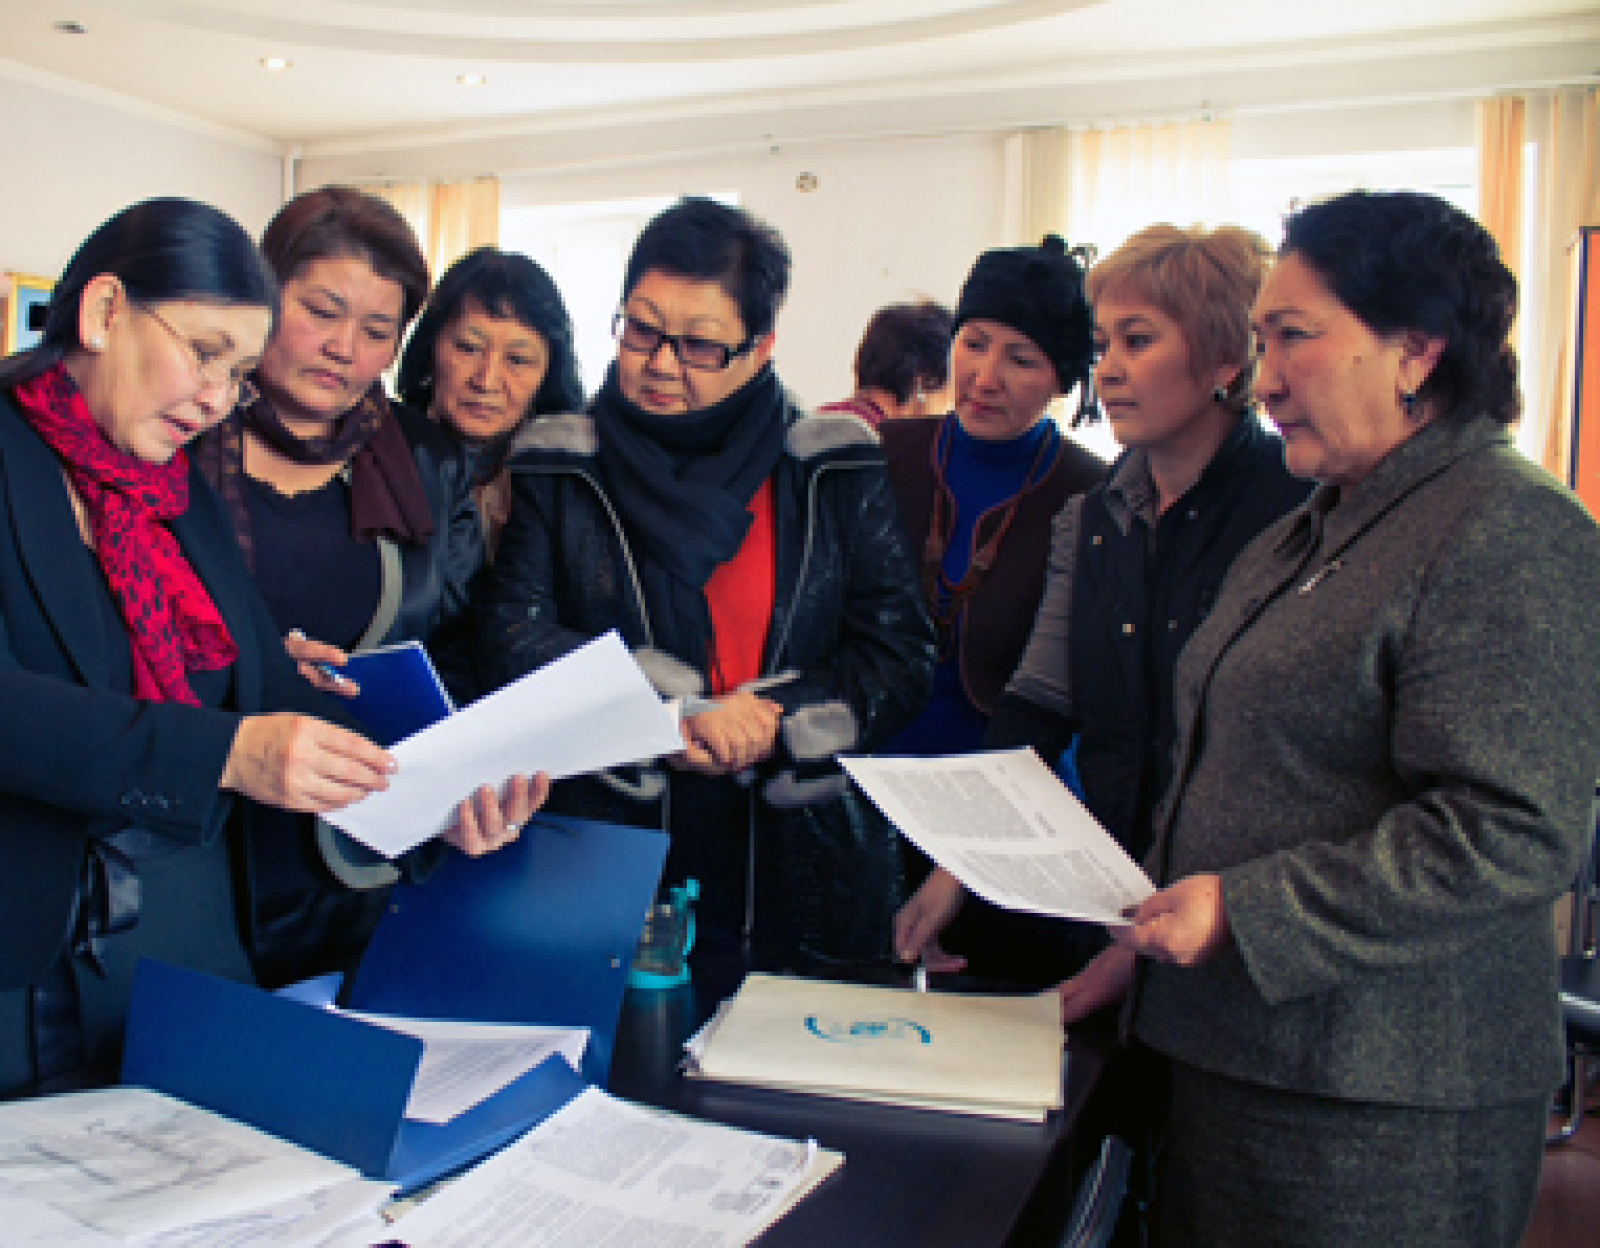 Women’s Discussion Club of Kyrgyzstan Awarded 2012 Madeleine K. Albright Grant